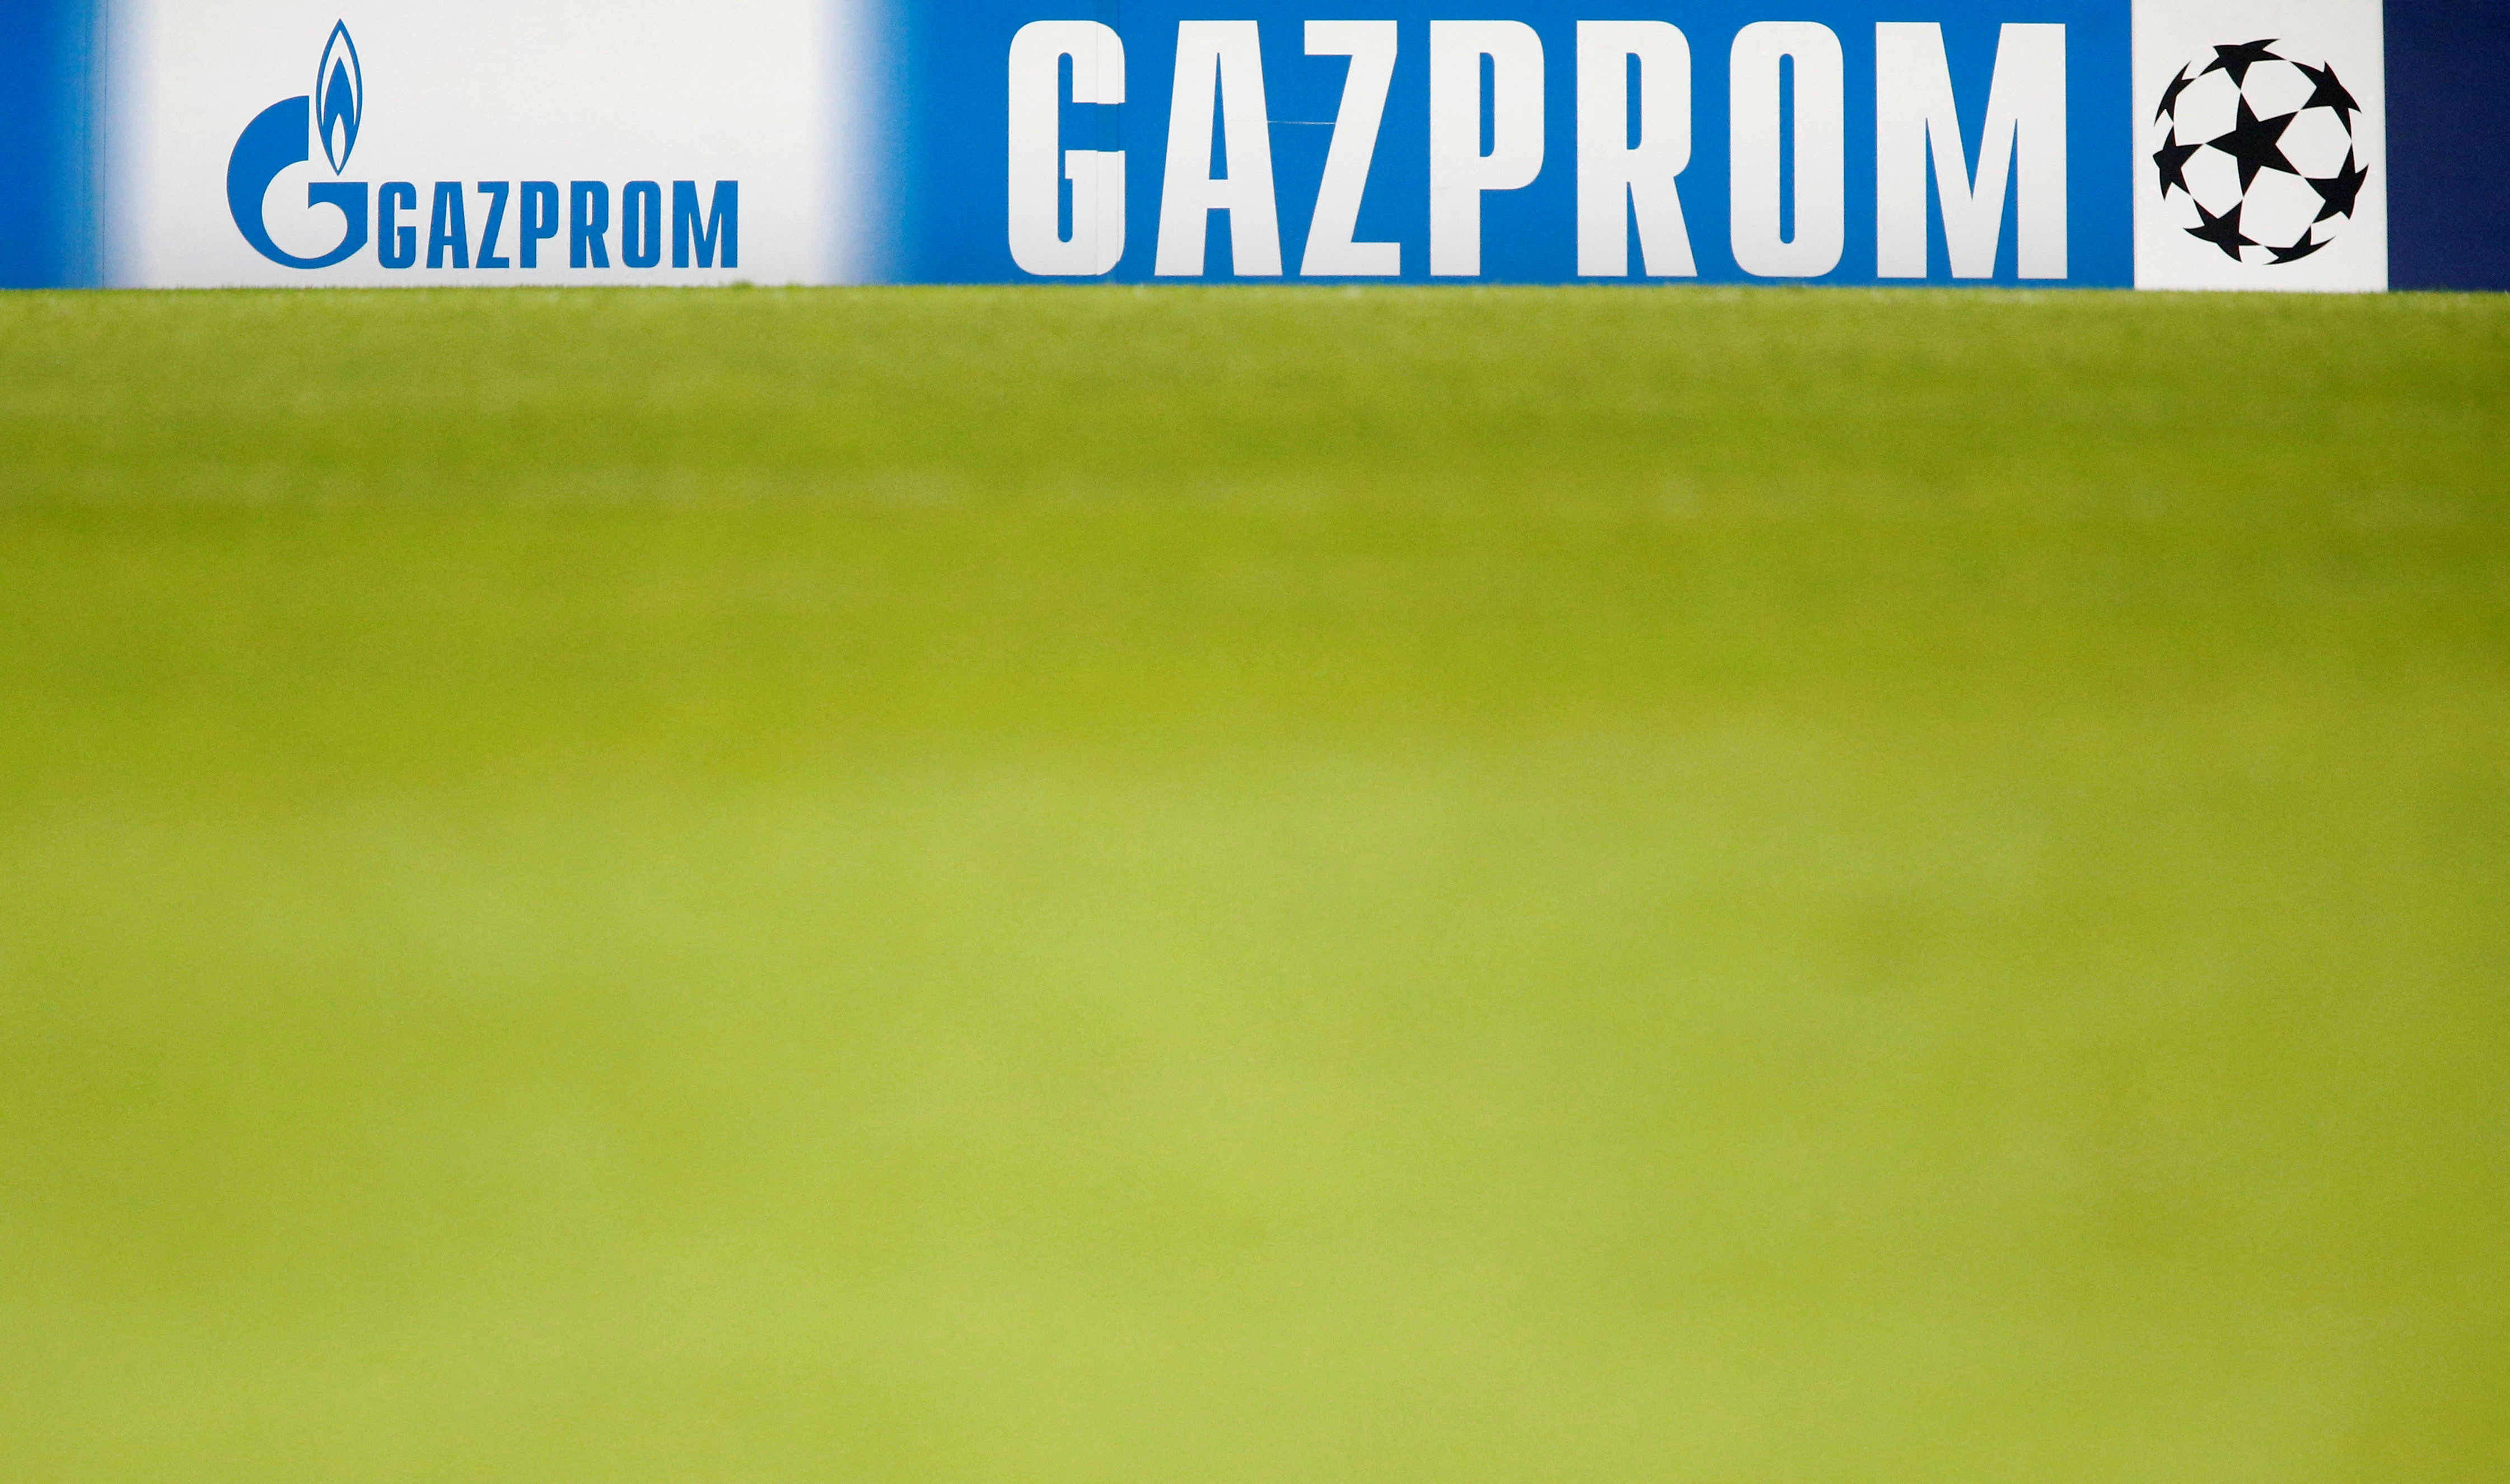 An advertising banner for Gazprom is seen after Champions League soccer match between Schalke 04 and Basel in Basel